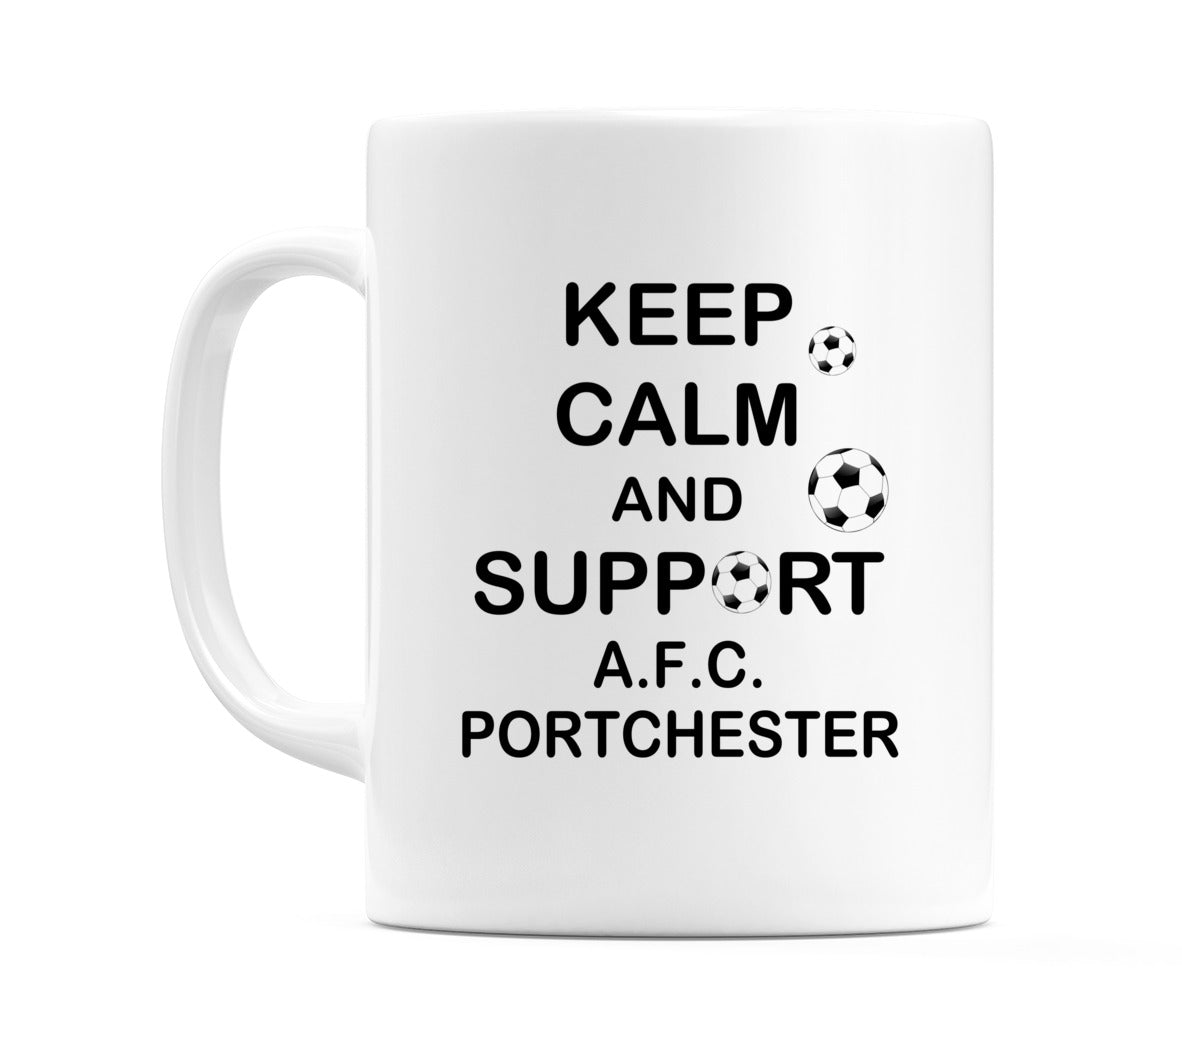 Keep Calm And Support A.F.C. Portchester Mug